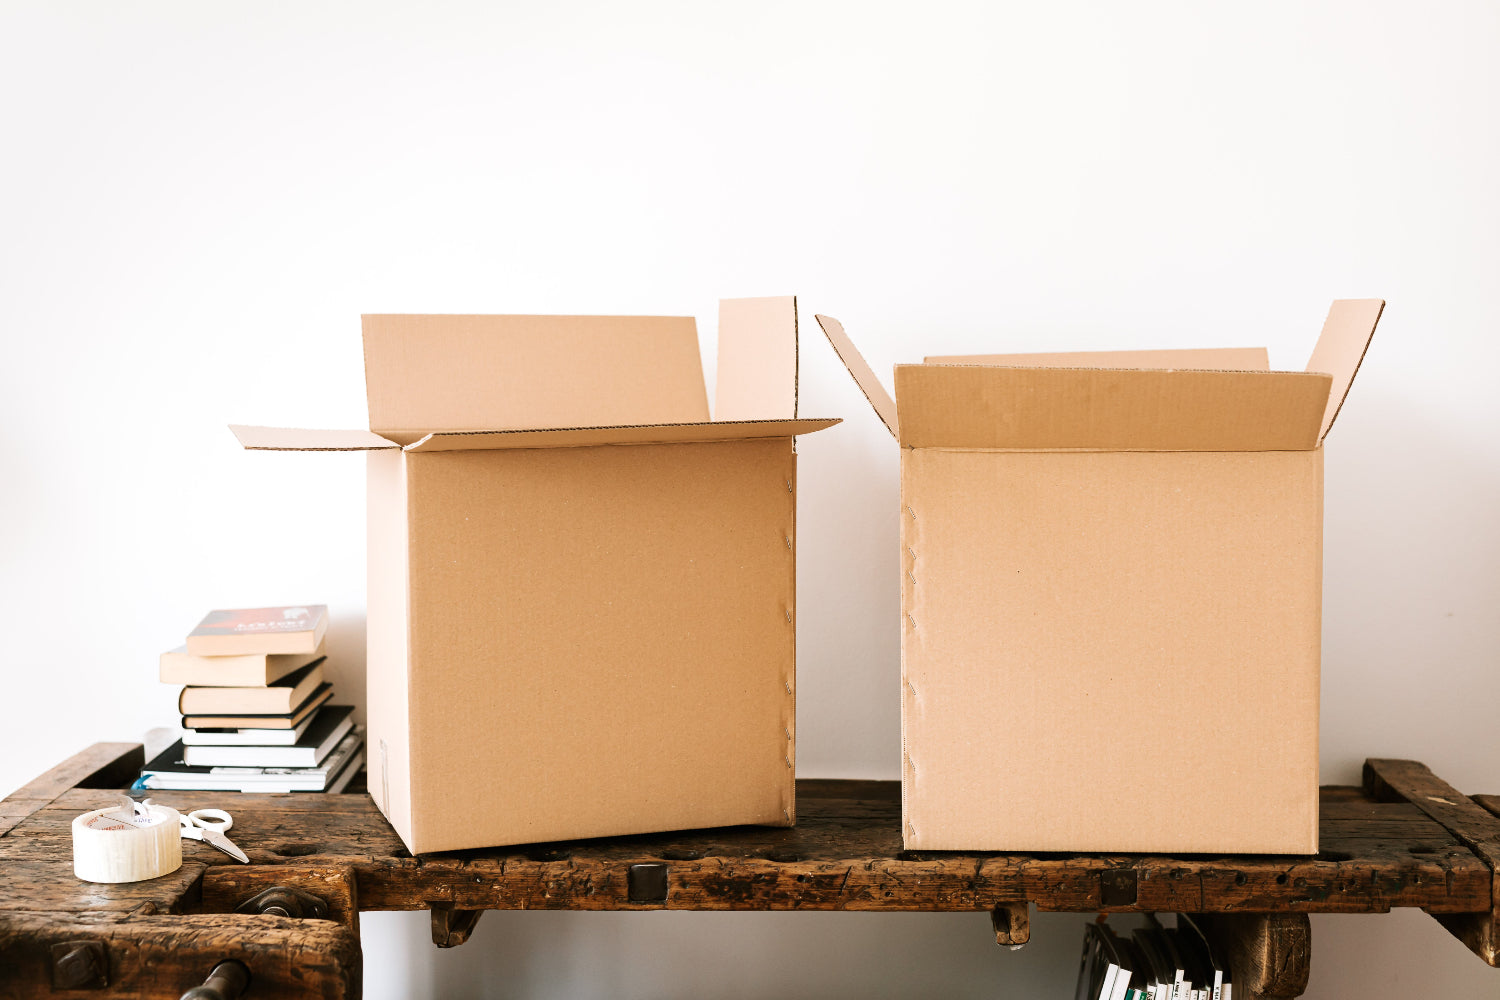 Two cardboard boxes open on a table ready to be packed for an online business